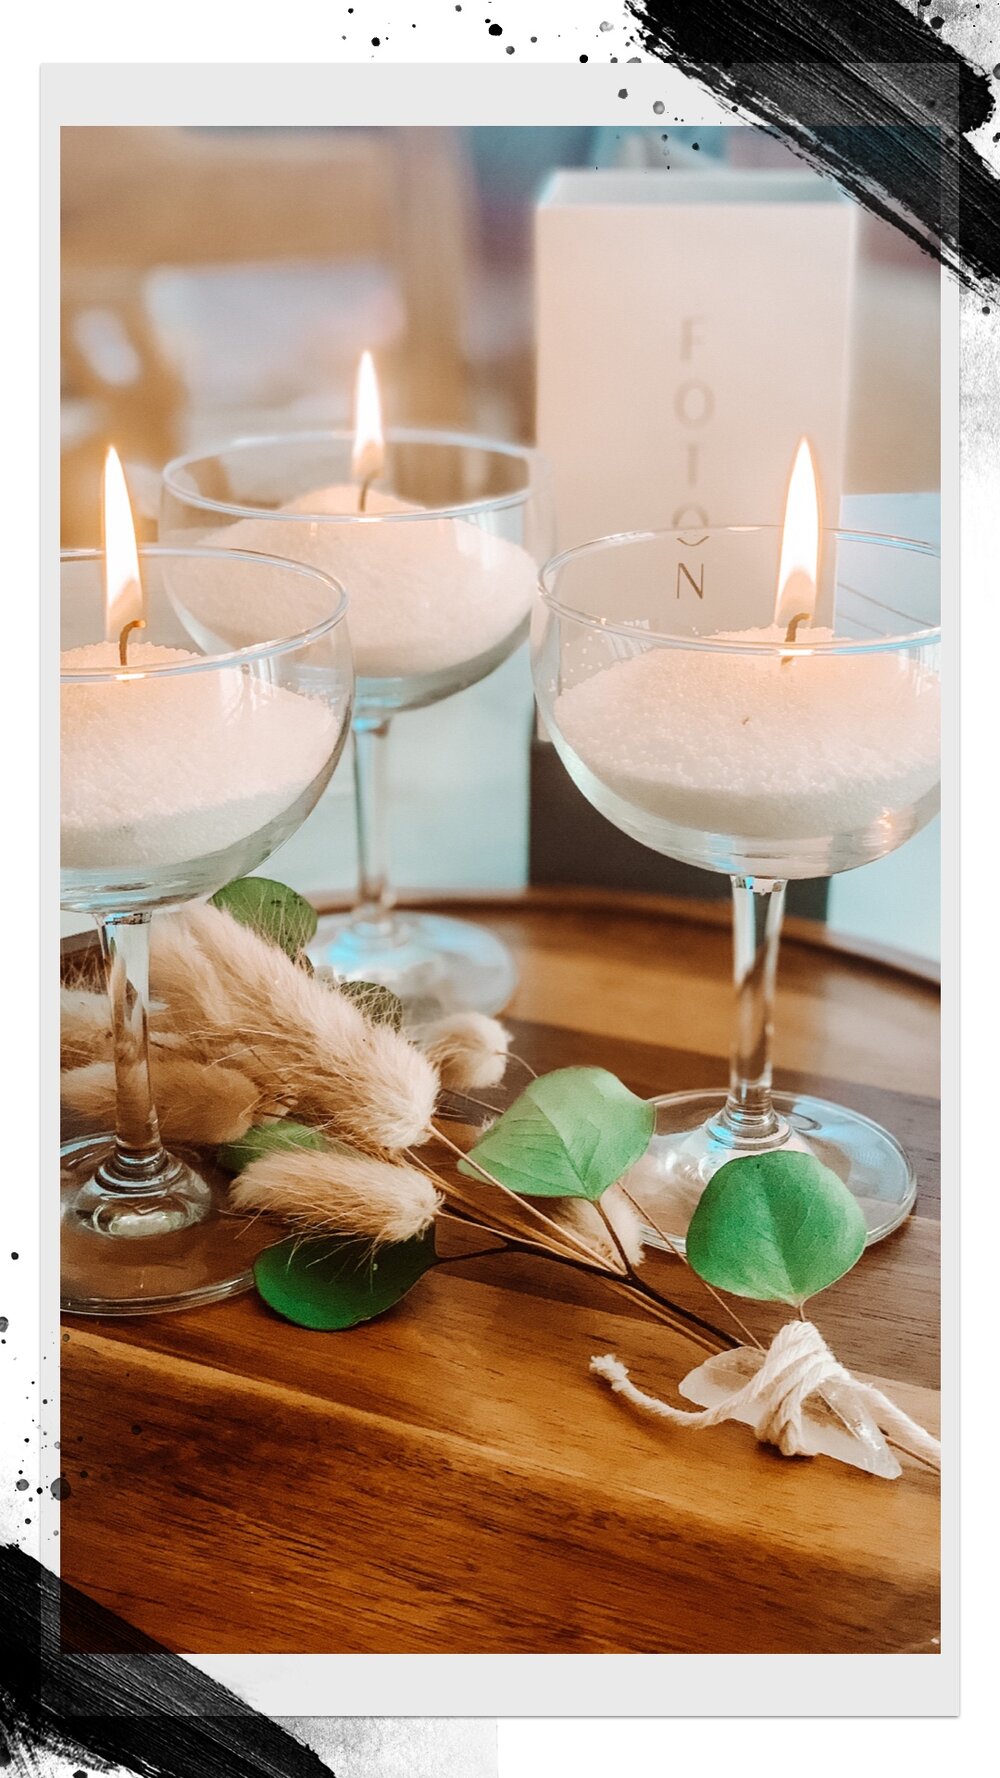 How are you styling your holiday centerpiece? Pearled candles are a mo